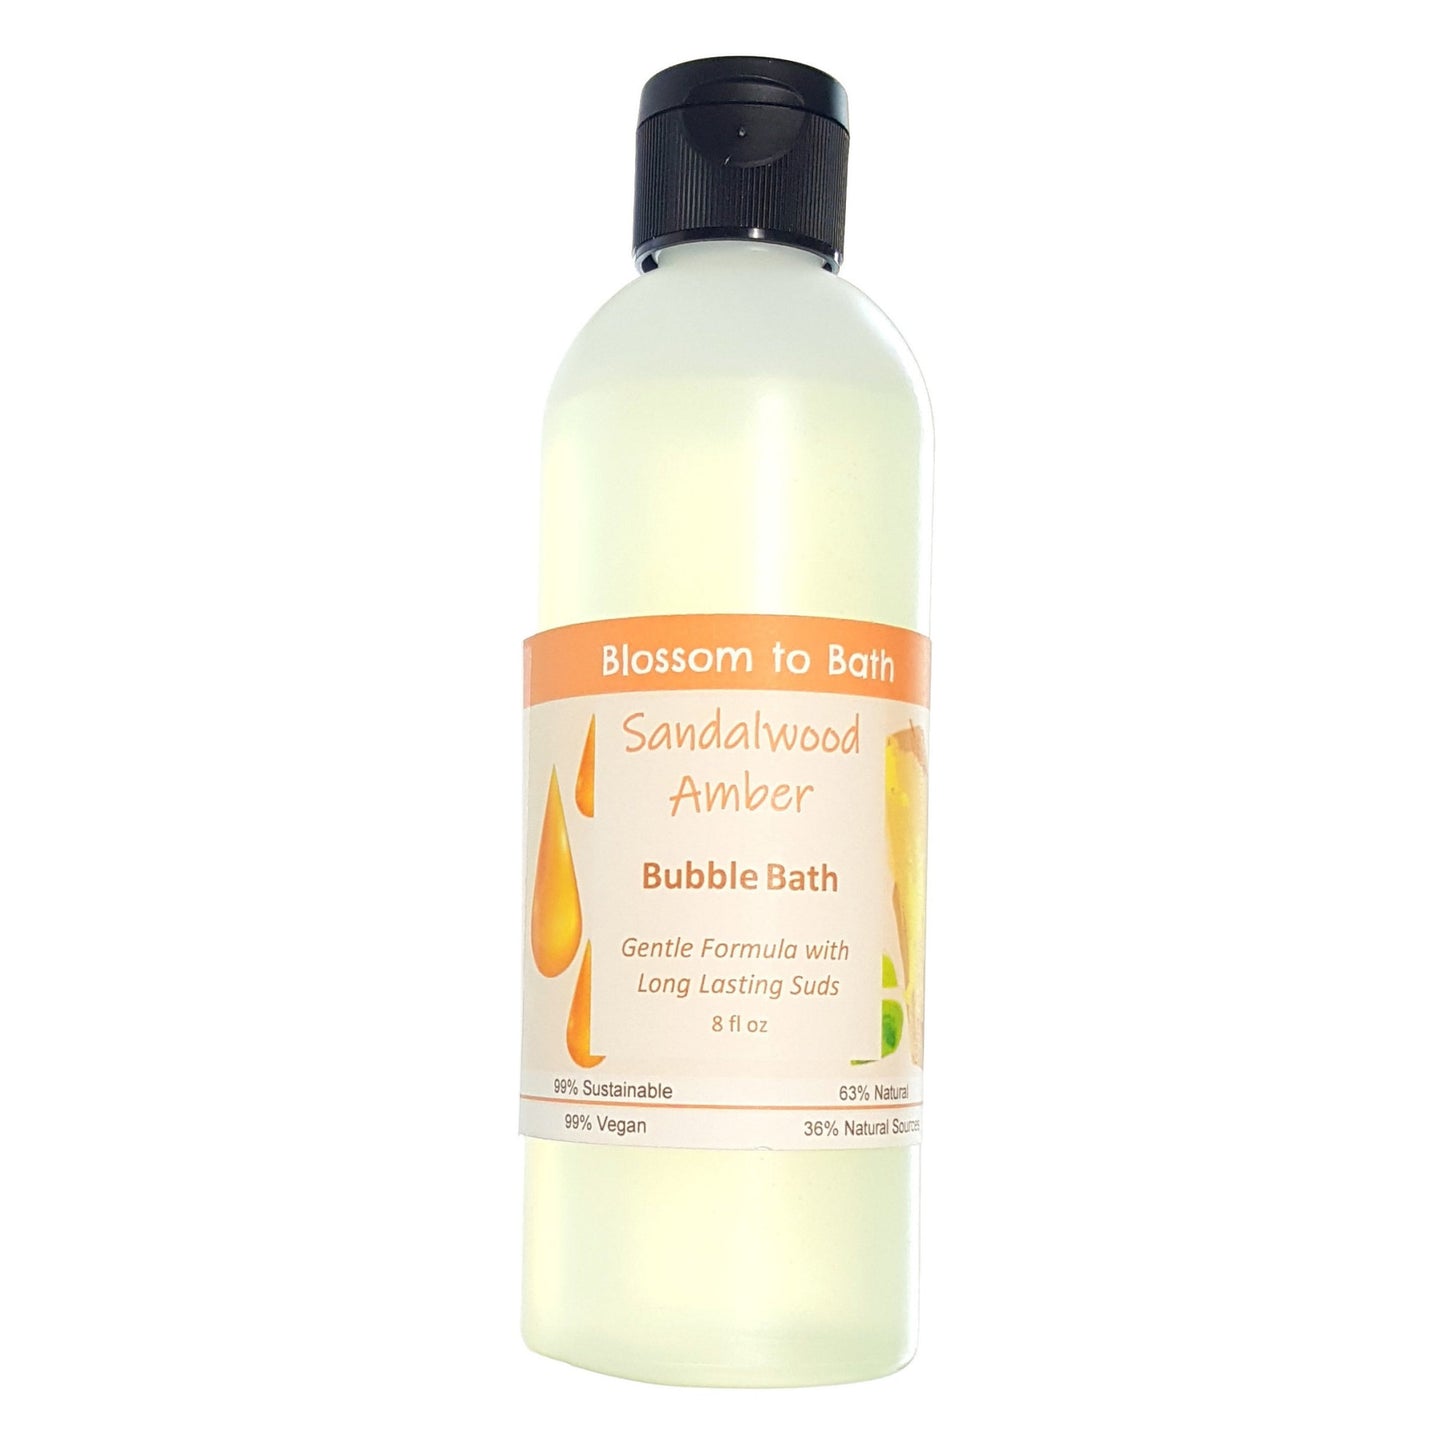 Buy Blossom to Bath Sandalwood Amber Bubble Bath from Flowersong Soap Studio.  Lively, long lasting  bubbles in a gentle plant based formula for maximum relaxation time  An irresistible combination of warm sandalwood and spice.